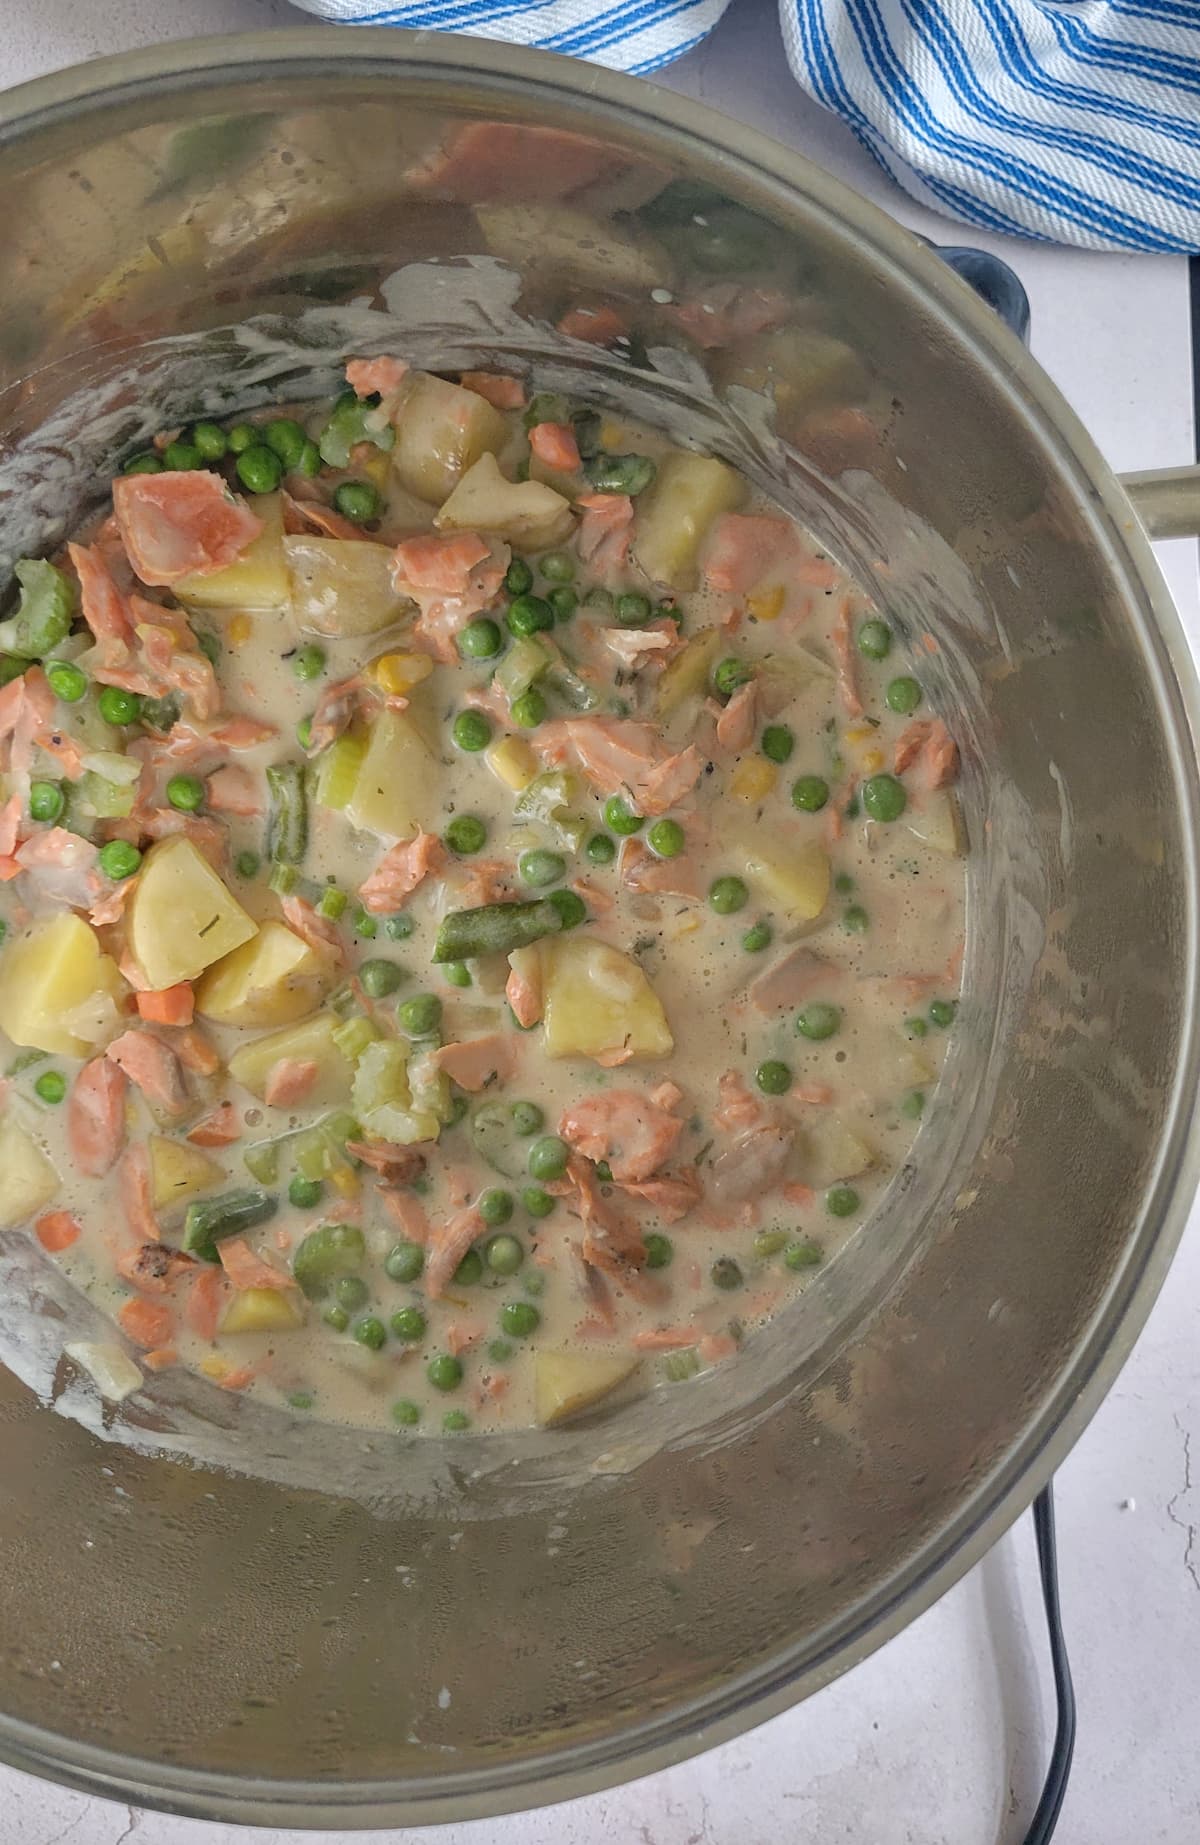 chunks of salmon, cheese, potatoes and cream in a pot